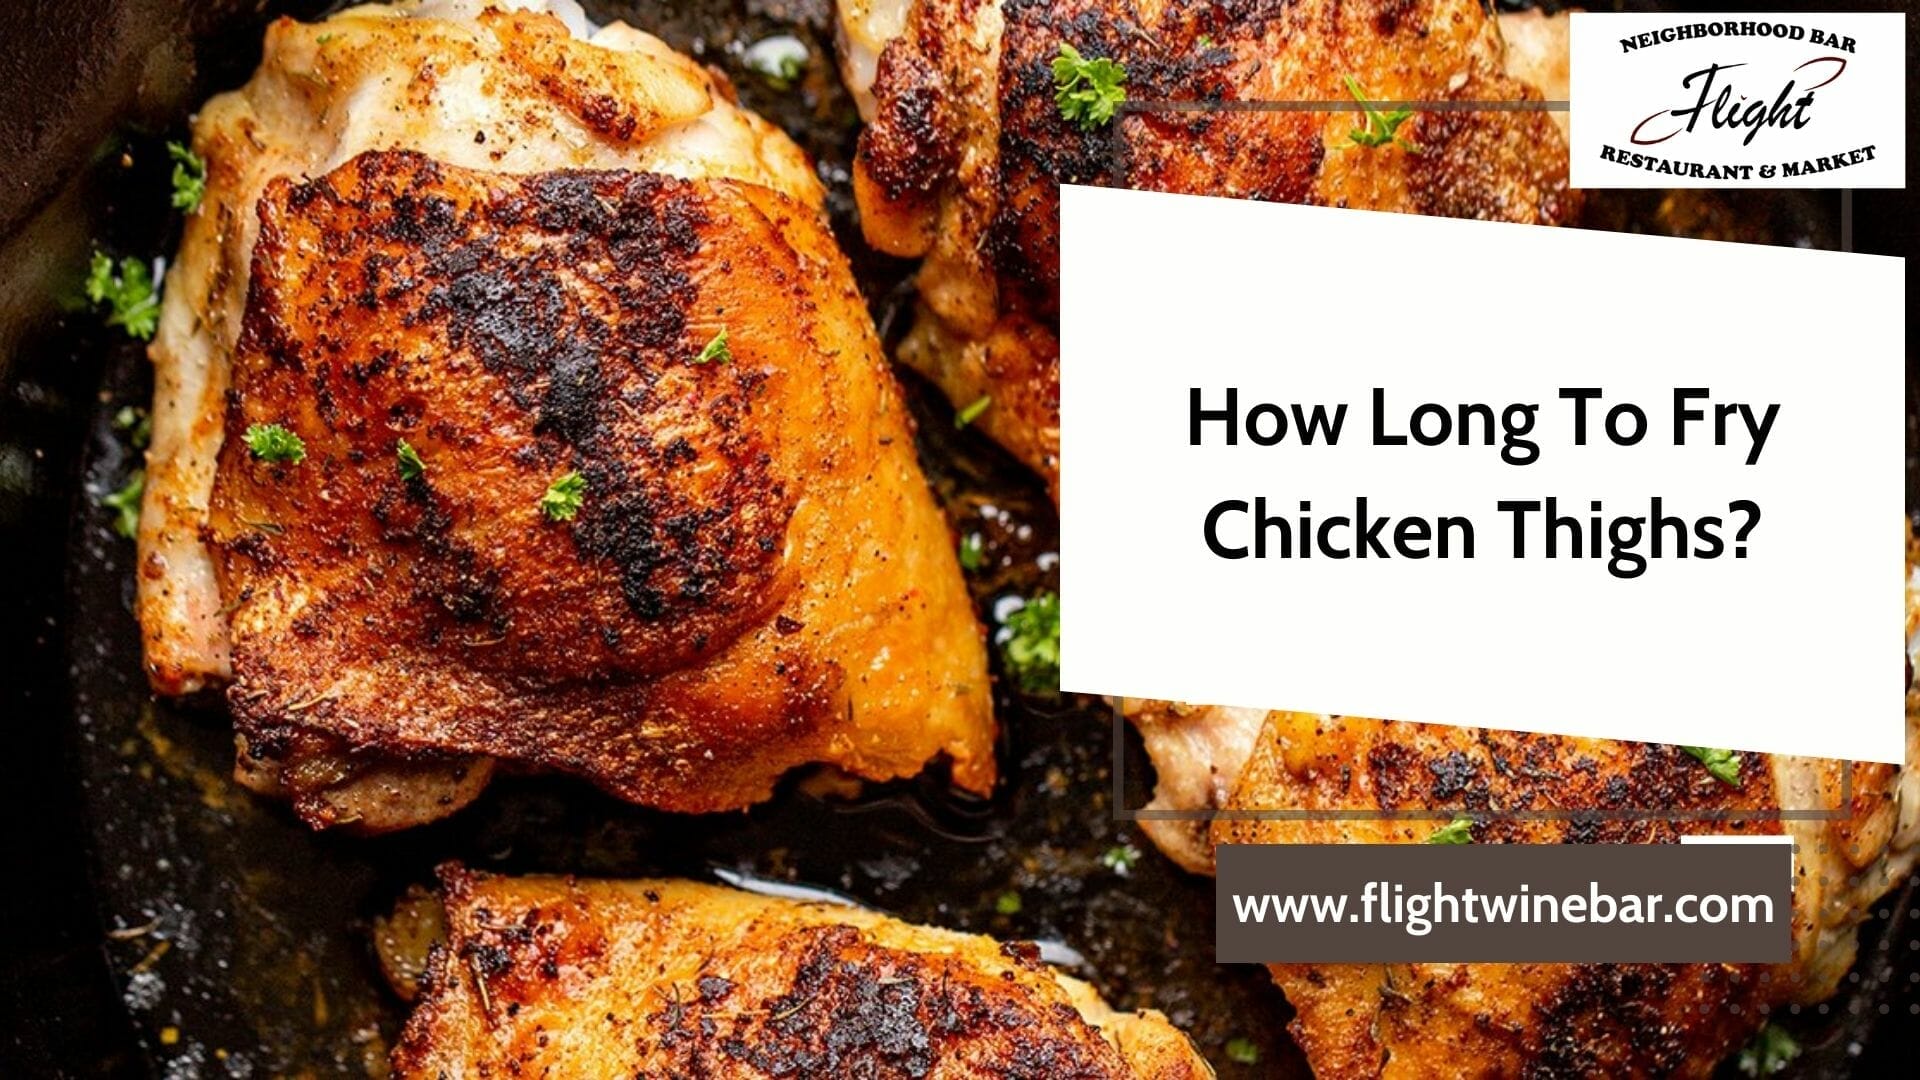 How Long To Fry Chicken Thighs